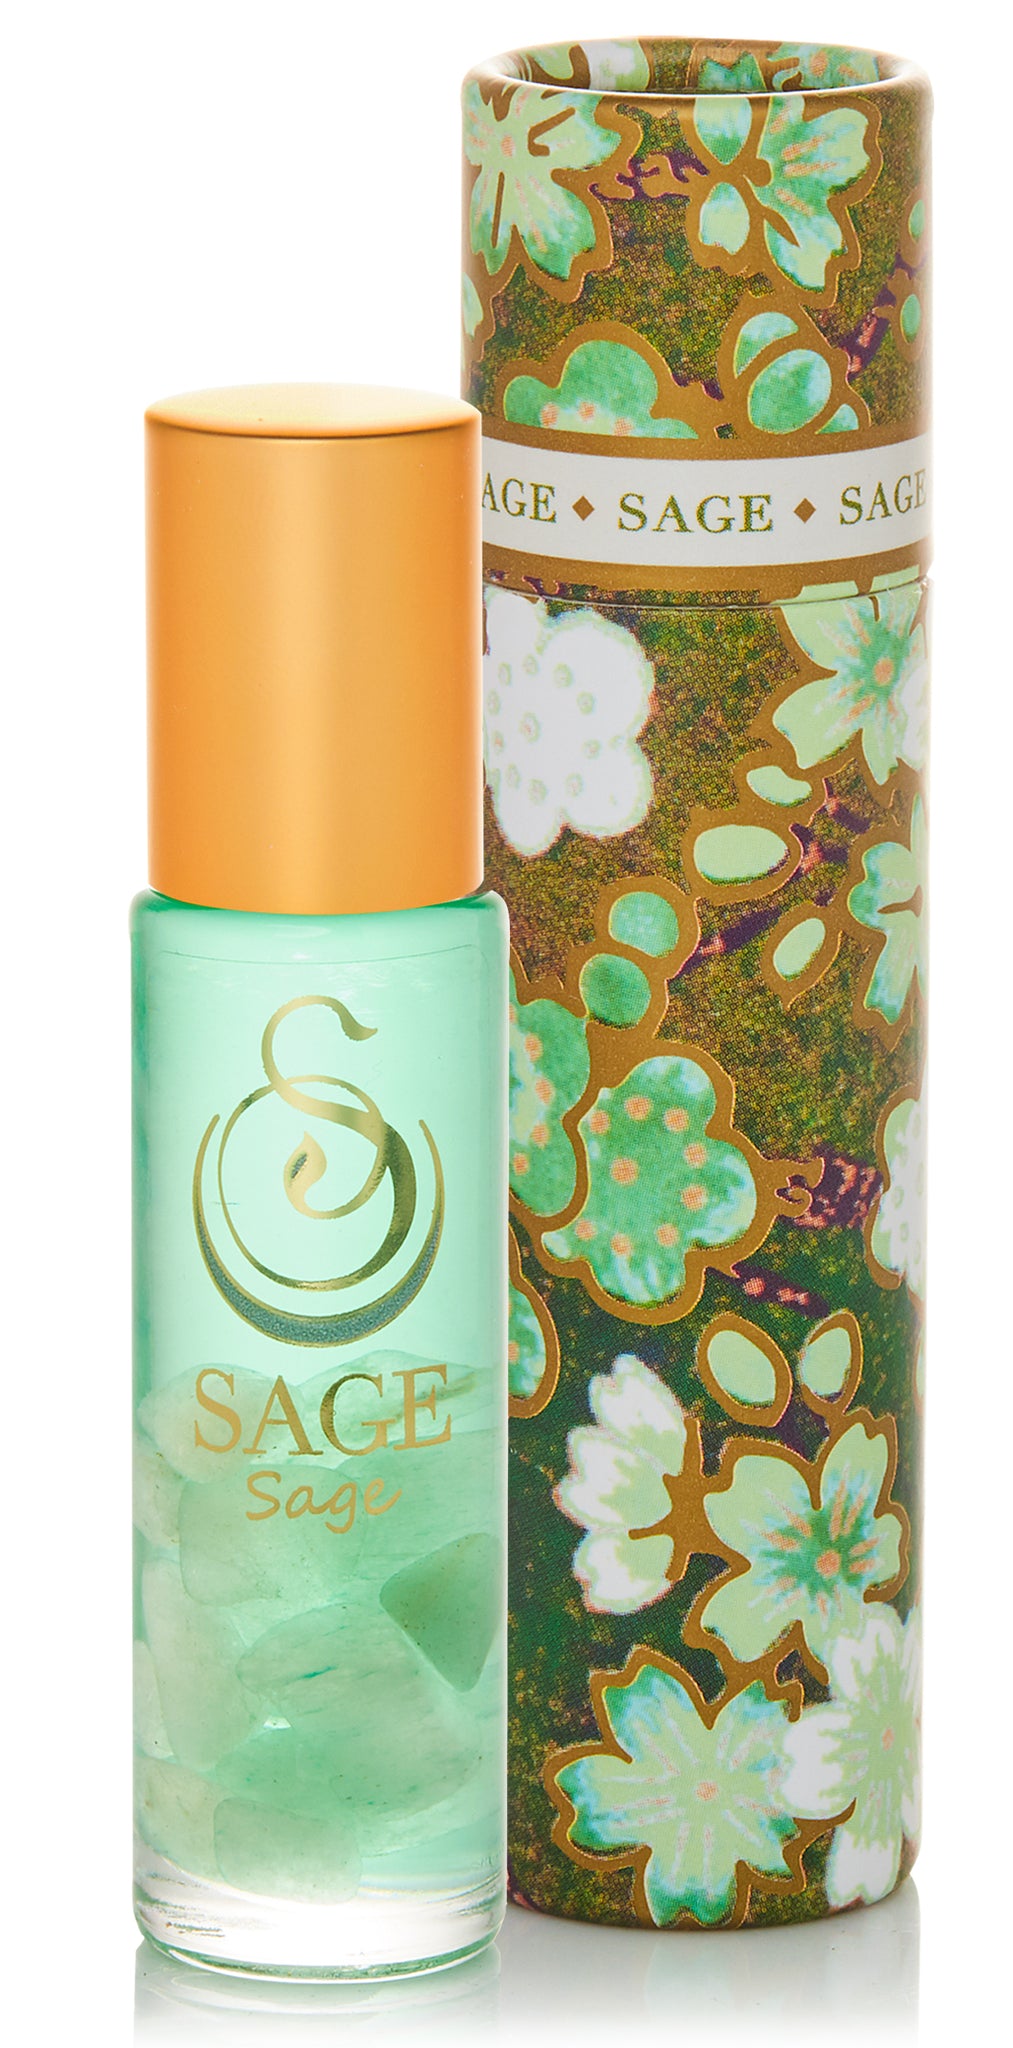 Sage 1/4 oz Gemstone Perfume Oil Concentrate Roll-On by Sage